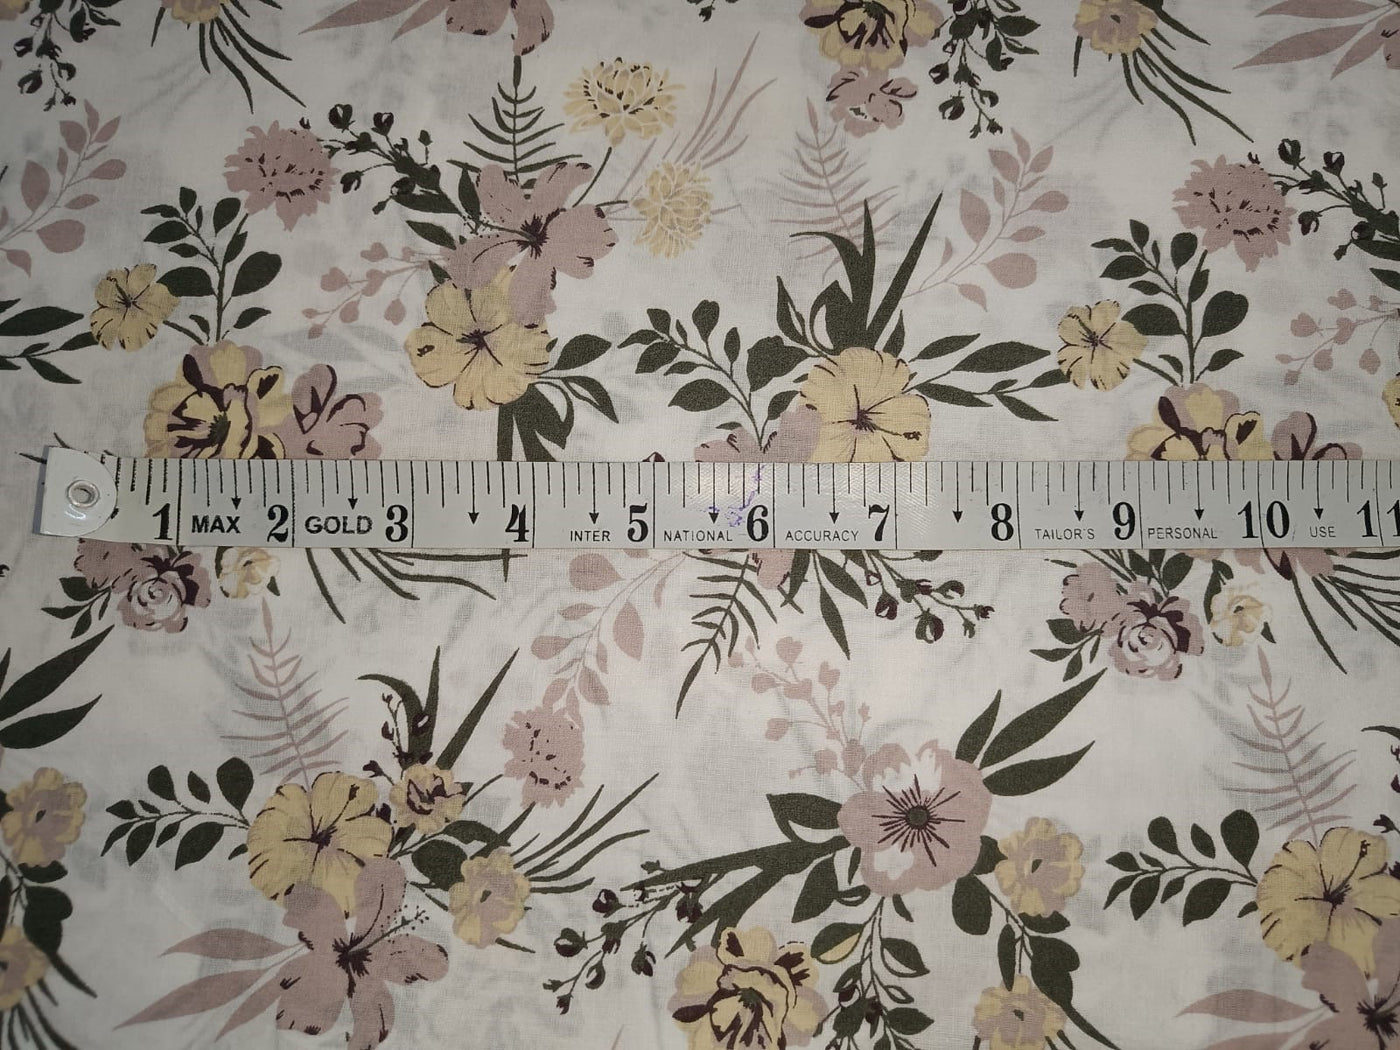 100% Pure Cotton lawn pastel floral  printed fabric  58" wide [12873]